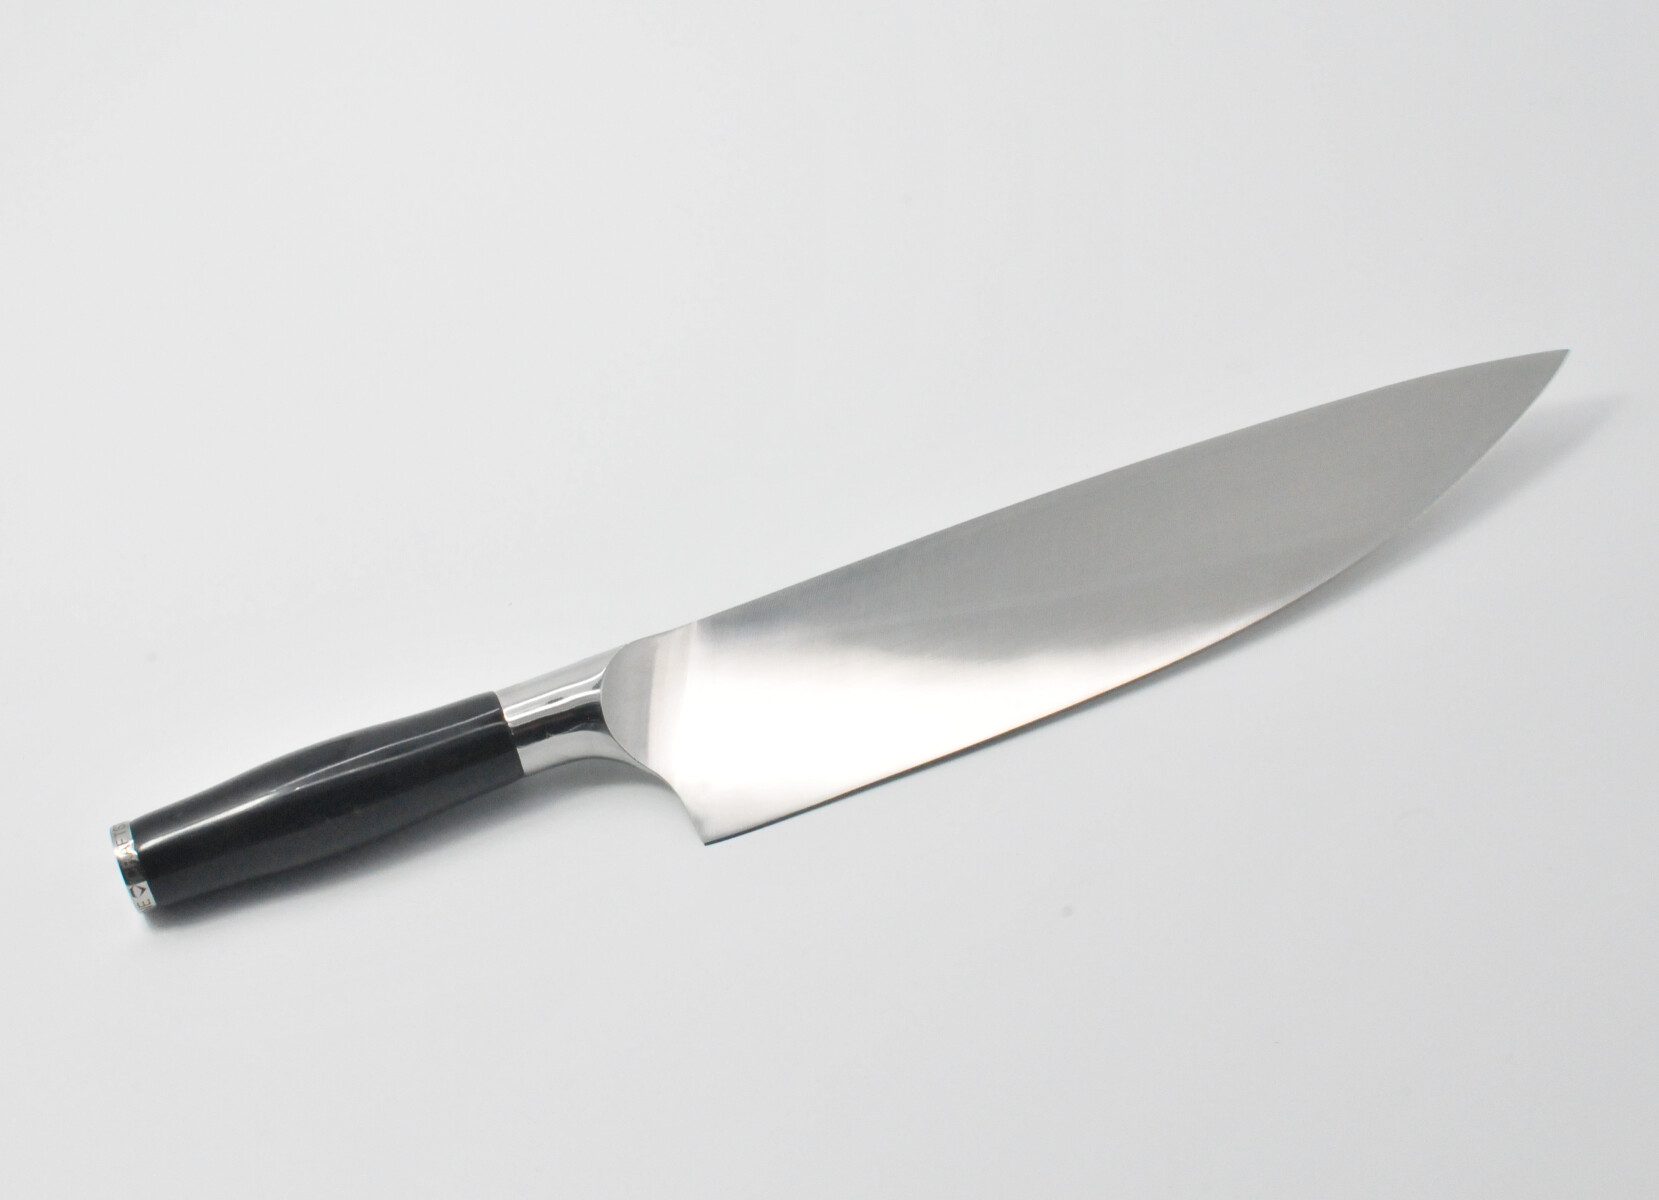 https://www.craftstoneknives.com/wp-content/uploads/bfi_thumb/10-Inch-Chef-Knife-with-a-Black-Marble-Handle-and-a-Black-Cubic-Zirconia-Stone-at-the-Back-of-the-Knife.-3jbcckd9tdfg92485oktu2.jpg